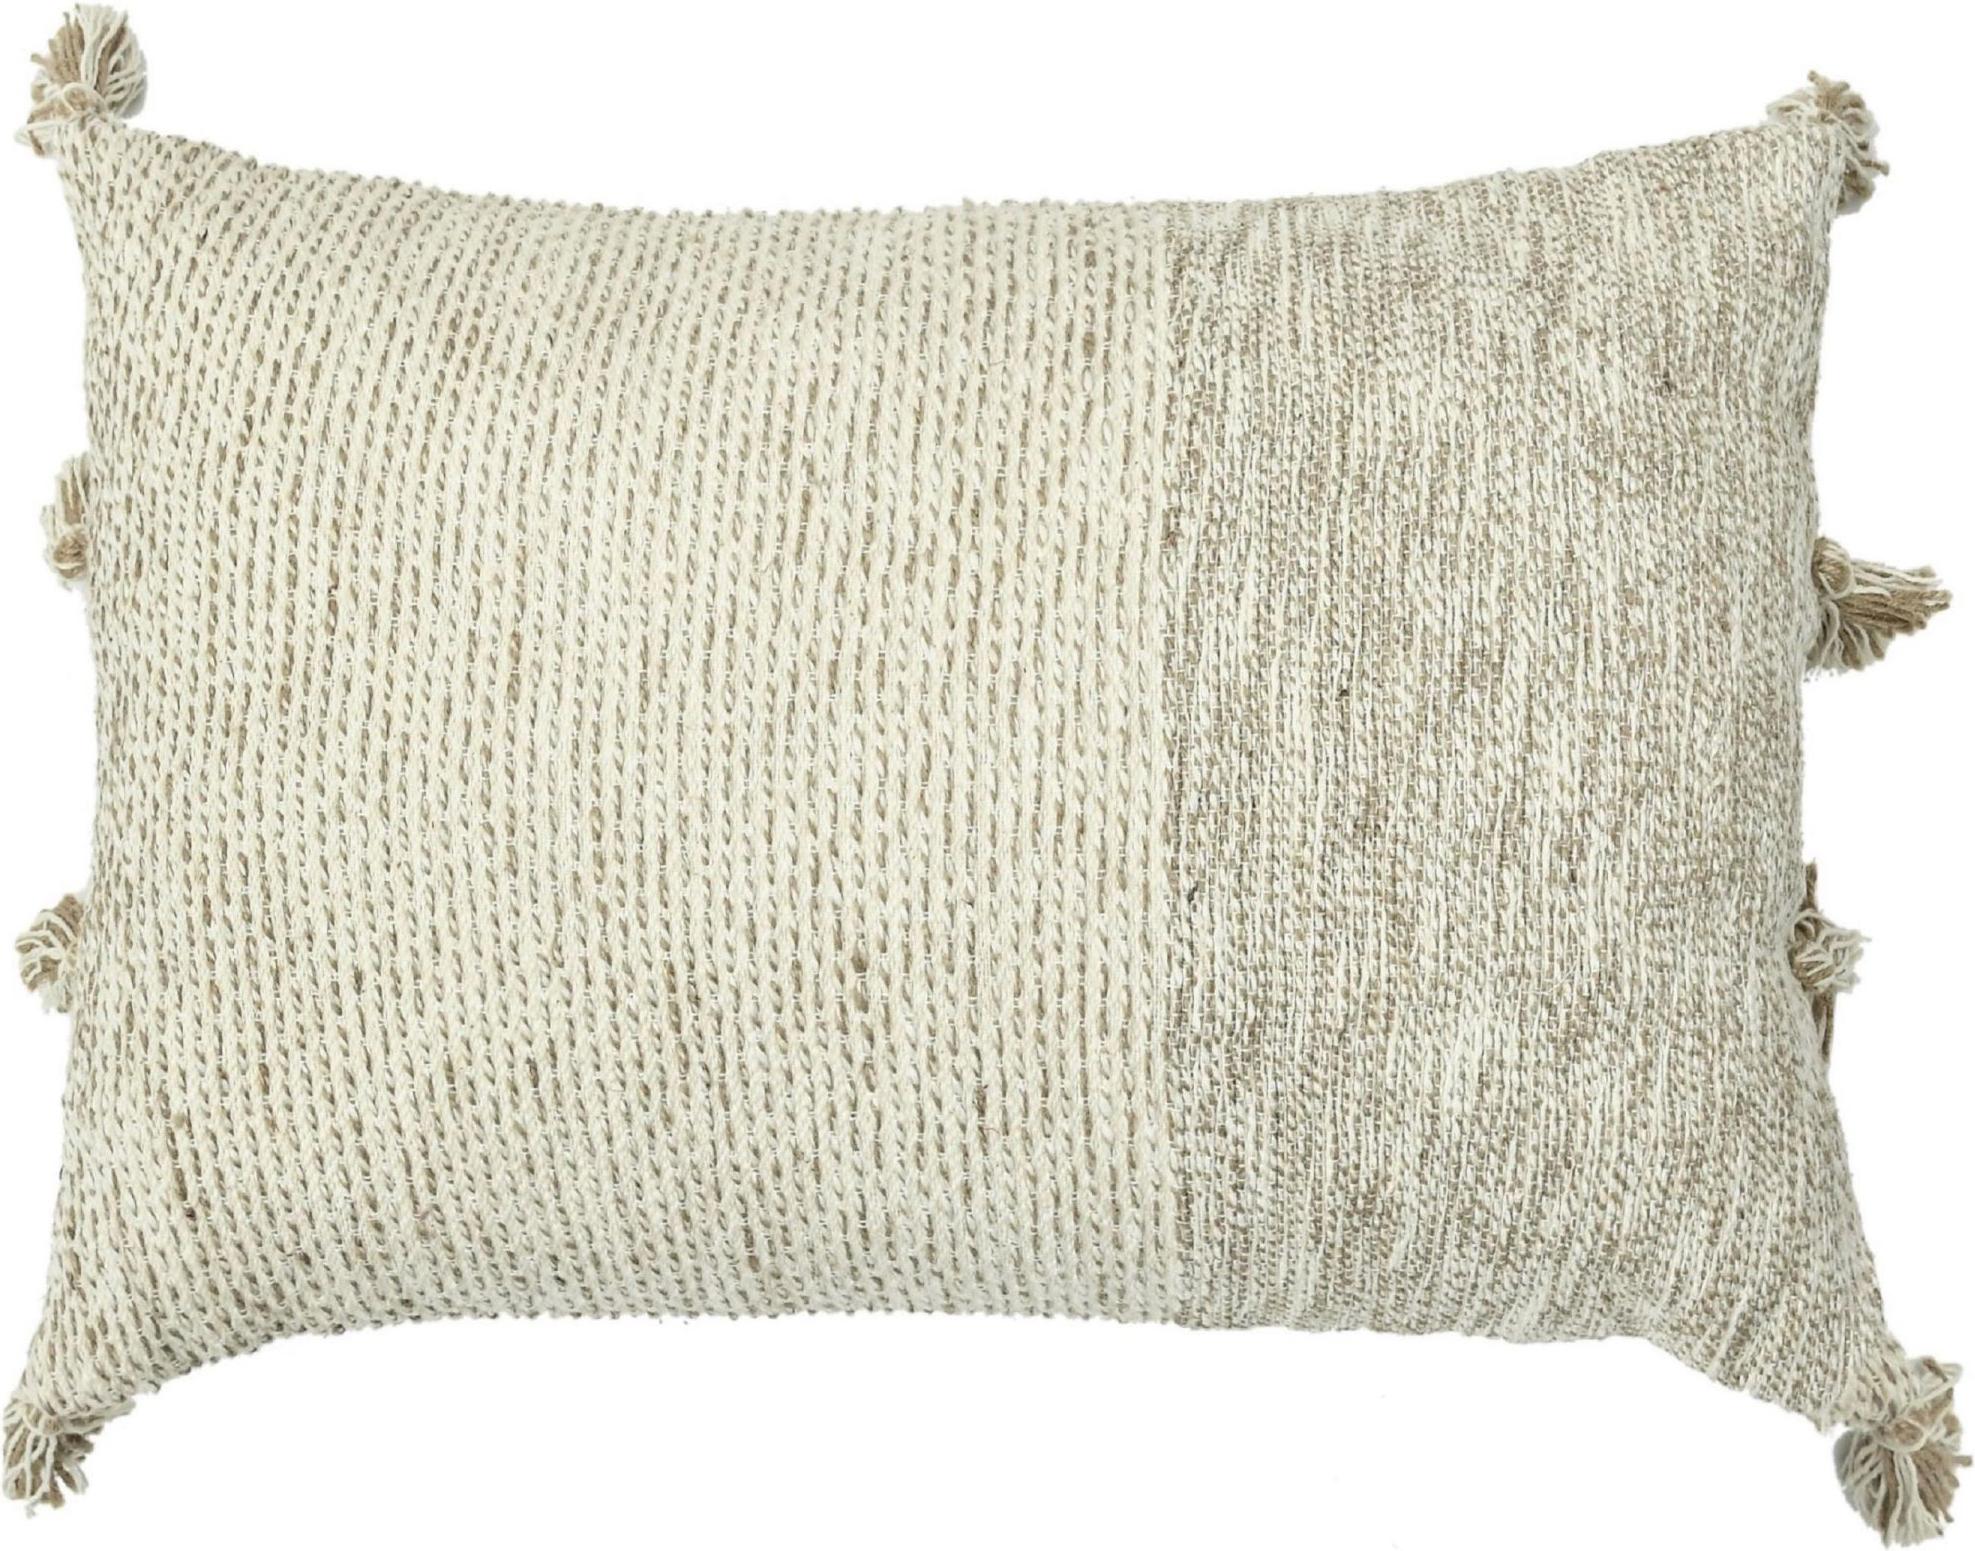 Modern Boho Chic Style Contemporary Wool and Cotton Pillow In Beige For Sale